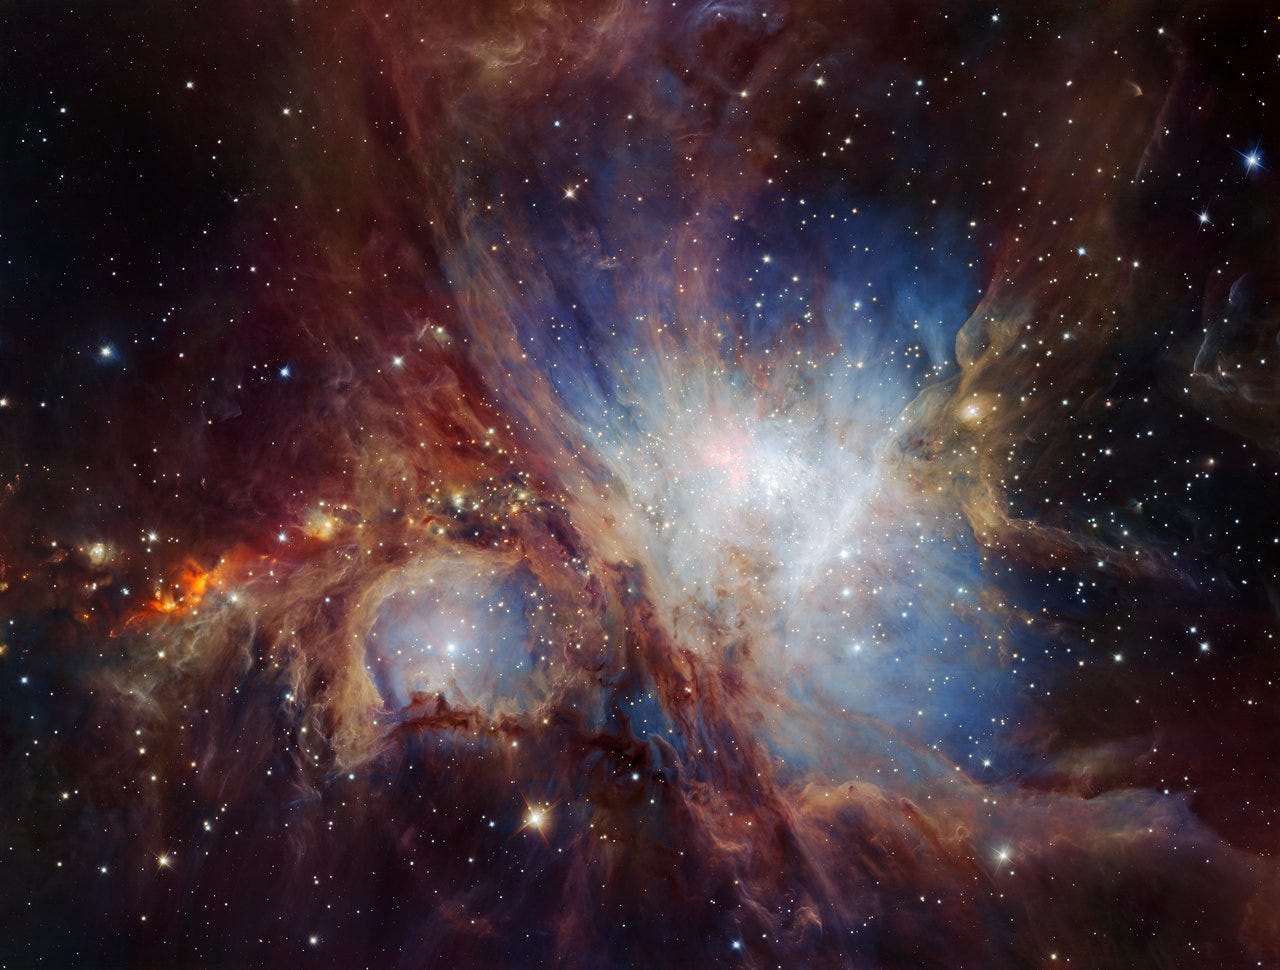 A deep-infrared view of the Orion nebula.